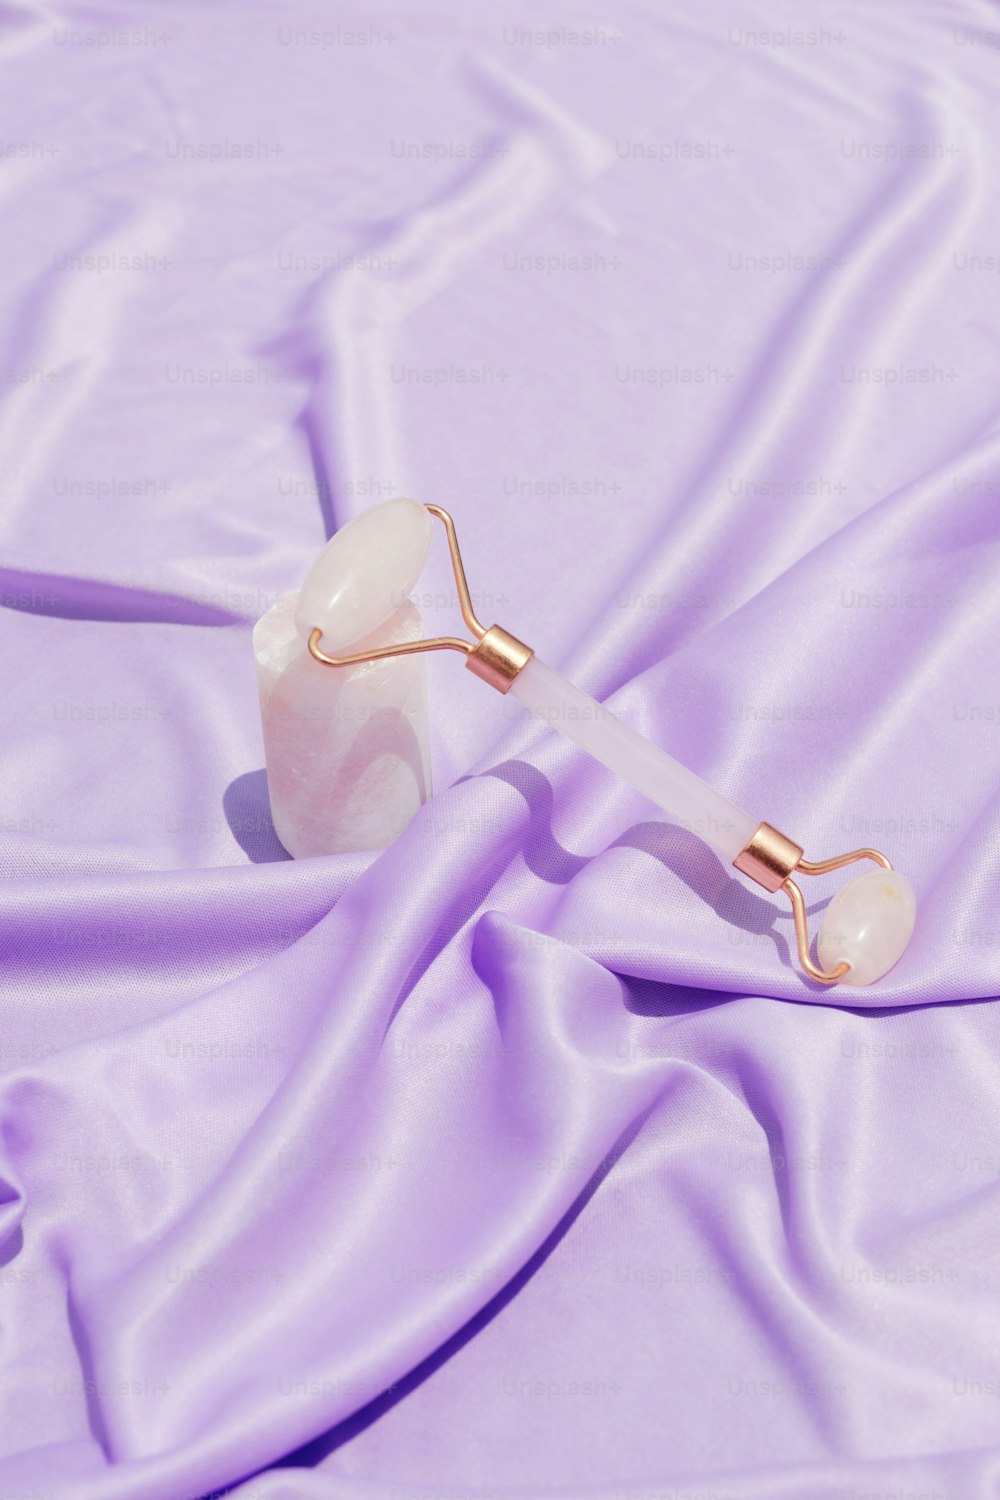 a pair of ear plugs laying on a purple cloth